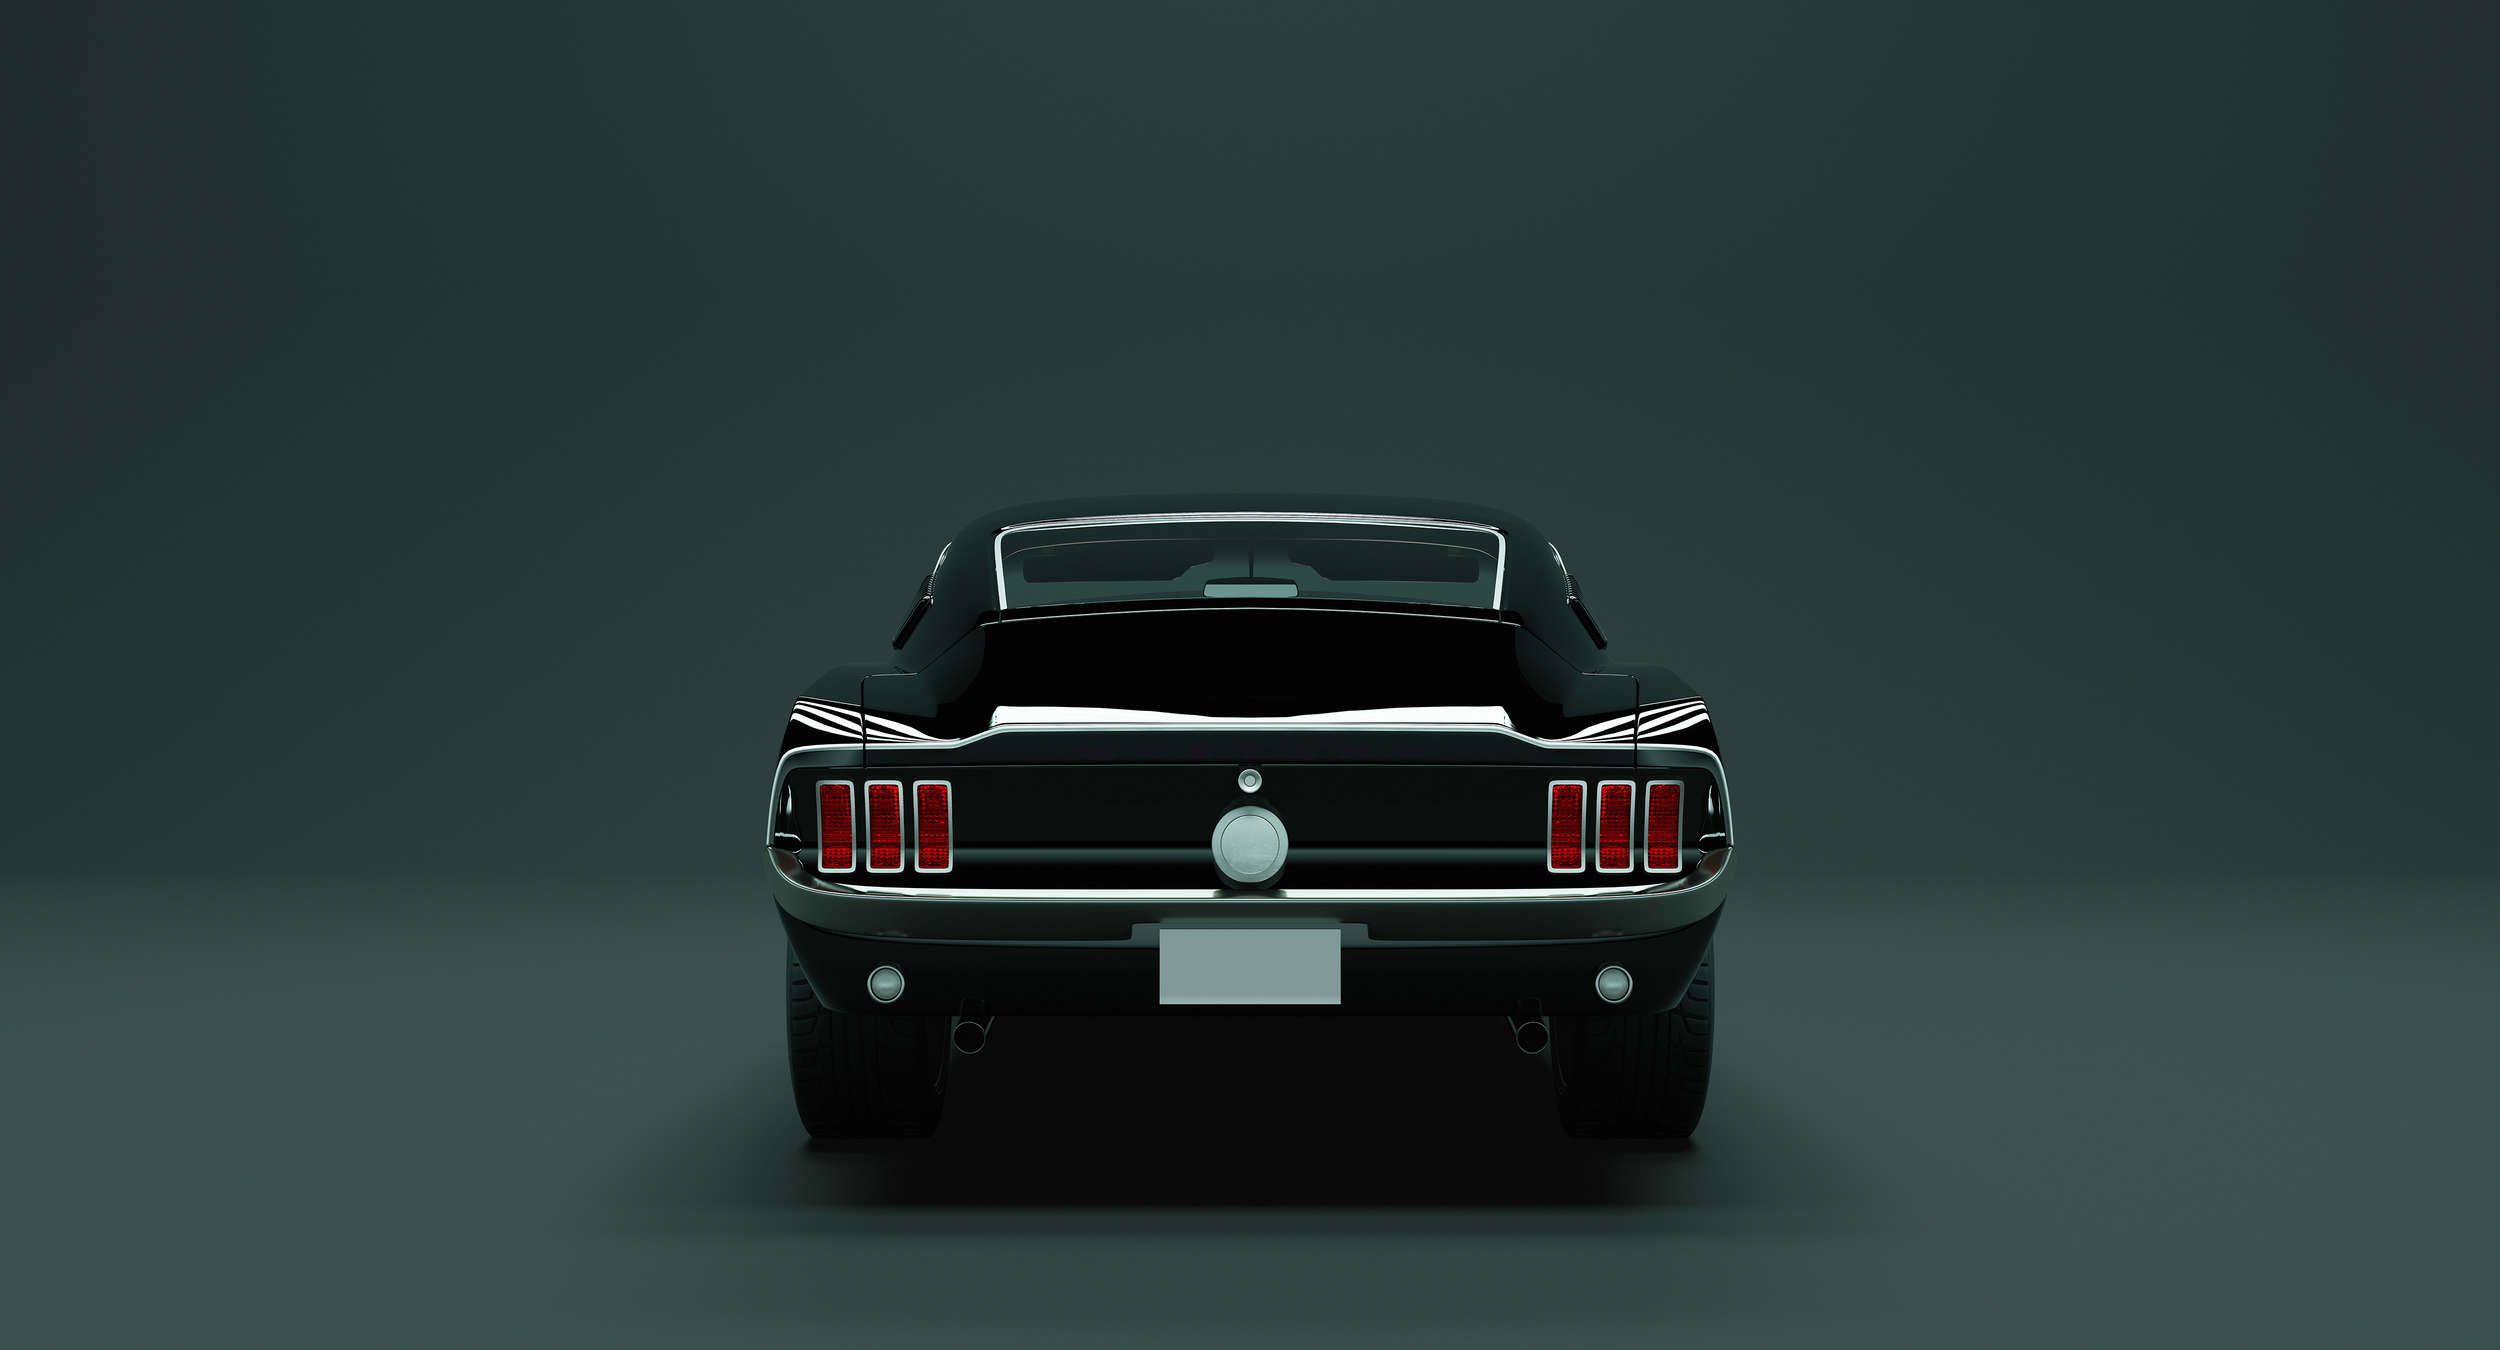             Mustang 3 - American Muscle Car Wallpaper - Blue, Black | Pearl Smooth Non-woven
        